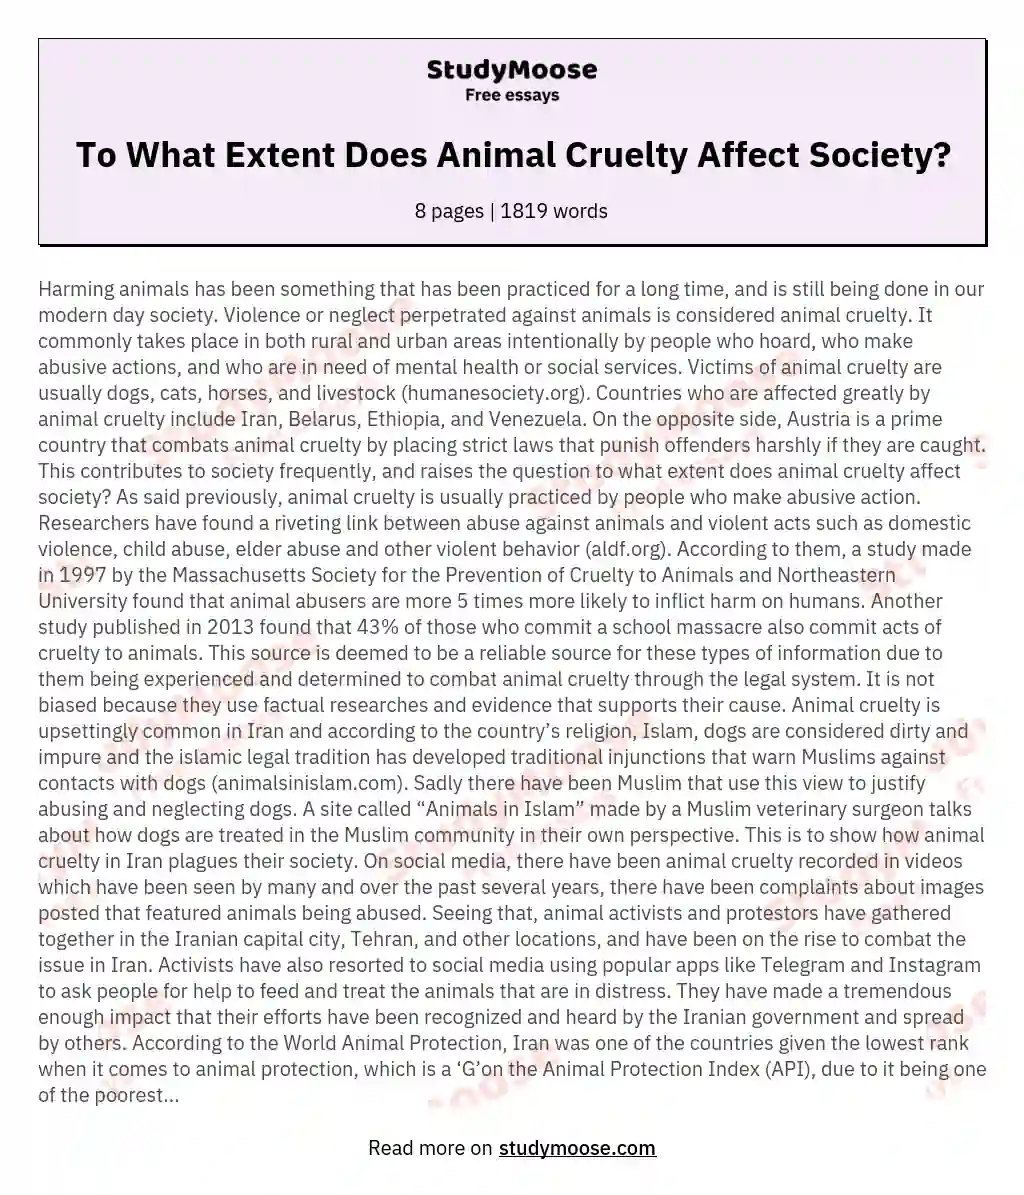 To What Extent Does Animal Cruelty Affect Society?